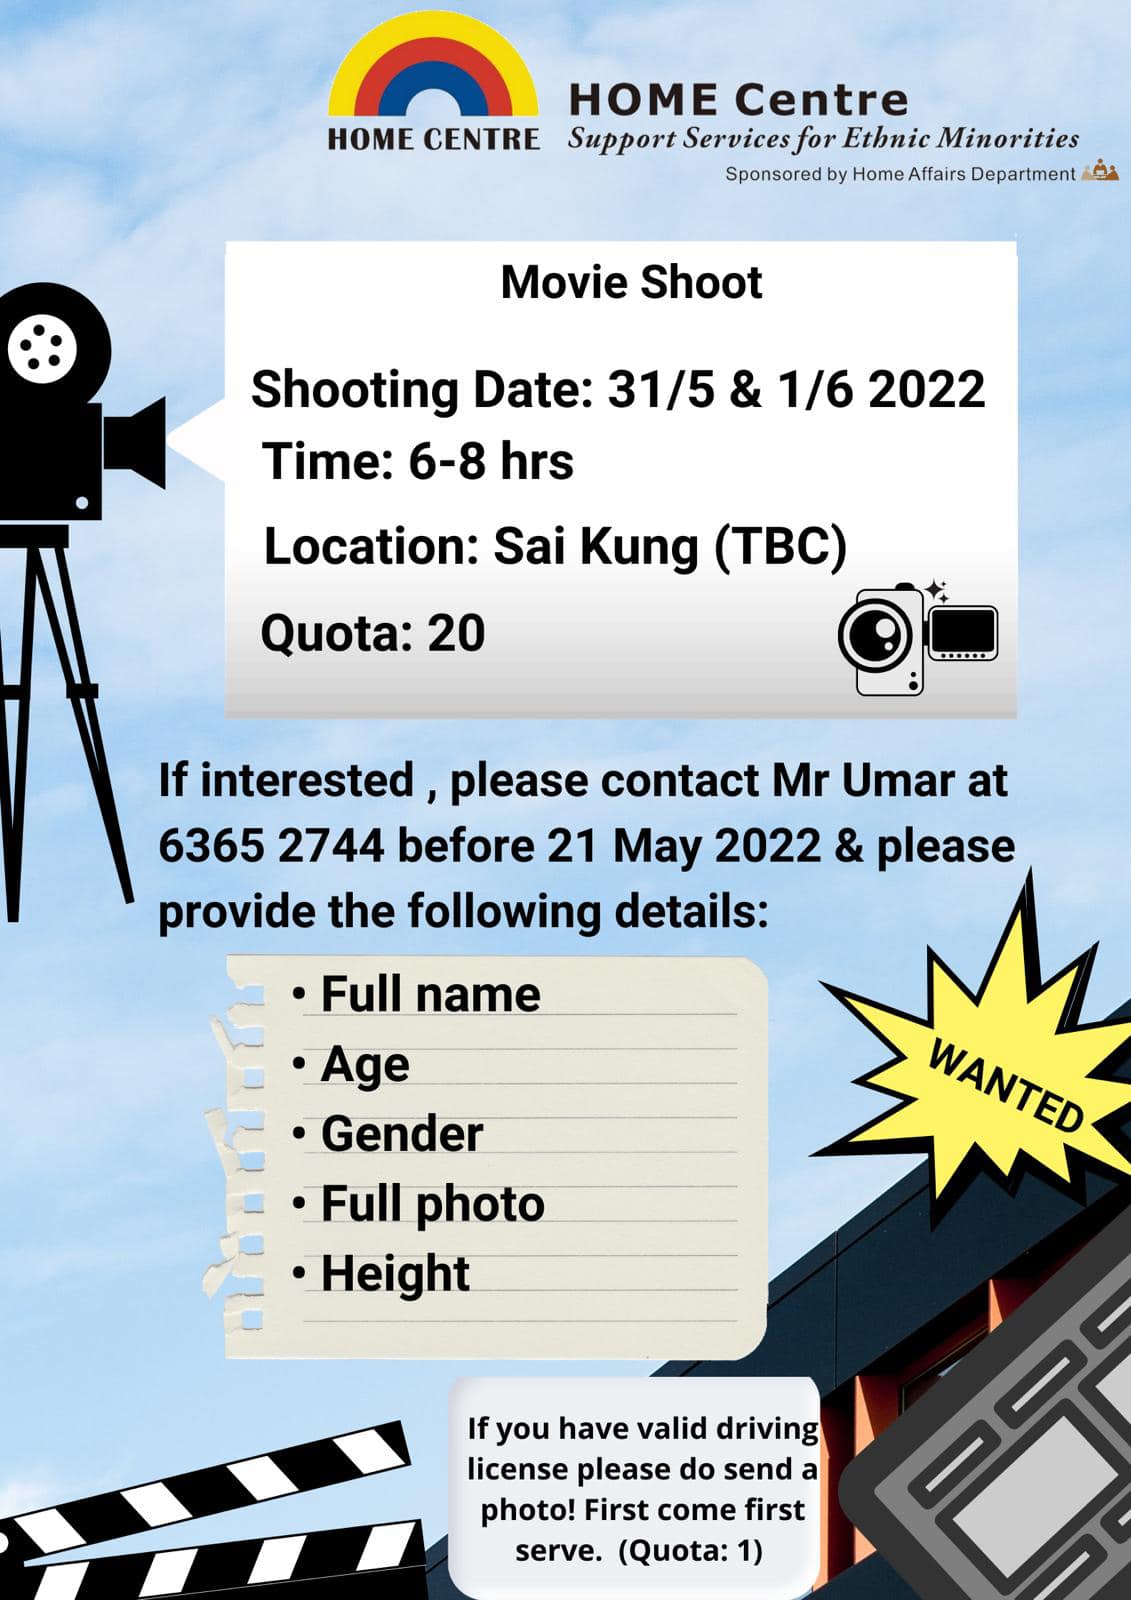 May be an image of text that says "HOME Centre HOME CENTRE Support Servicesfo Ethnic Minorities SponsoredbyHomeAffairsDepartment Movie Shoot Shooting Date: 31/5 & 1/6 2022 Time: 6-8 hrs Location: Sai Kung (TBC) Quota: 20 If interested please contact Mr Umar at 6365 2744 before 21 May 2022 & please provide the following details: .Full name .Age •Gender Full photo Height WANTED If you have valid driving license please do send a photo! First come first serve. (Quota: 1)"